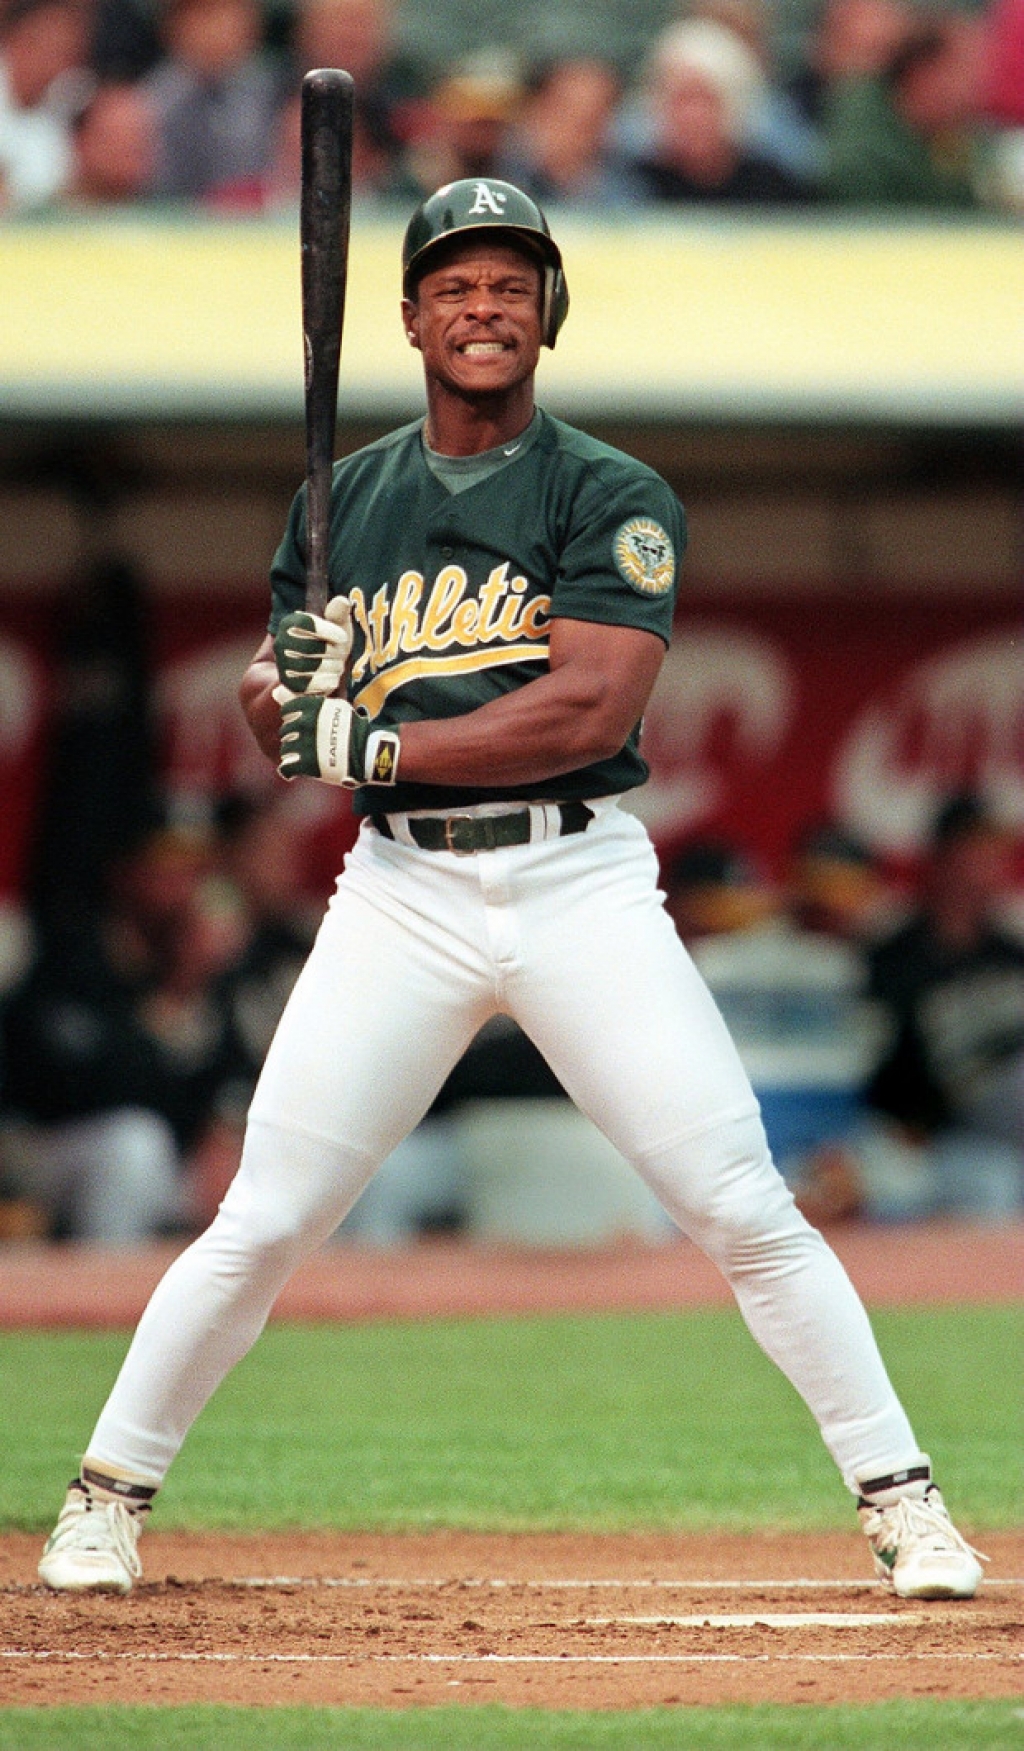 Who is the best Oakland A's player not in the Hall of Fame